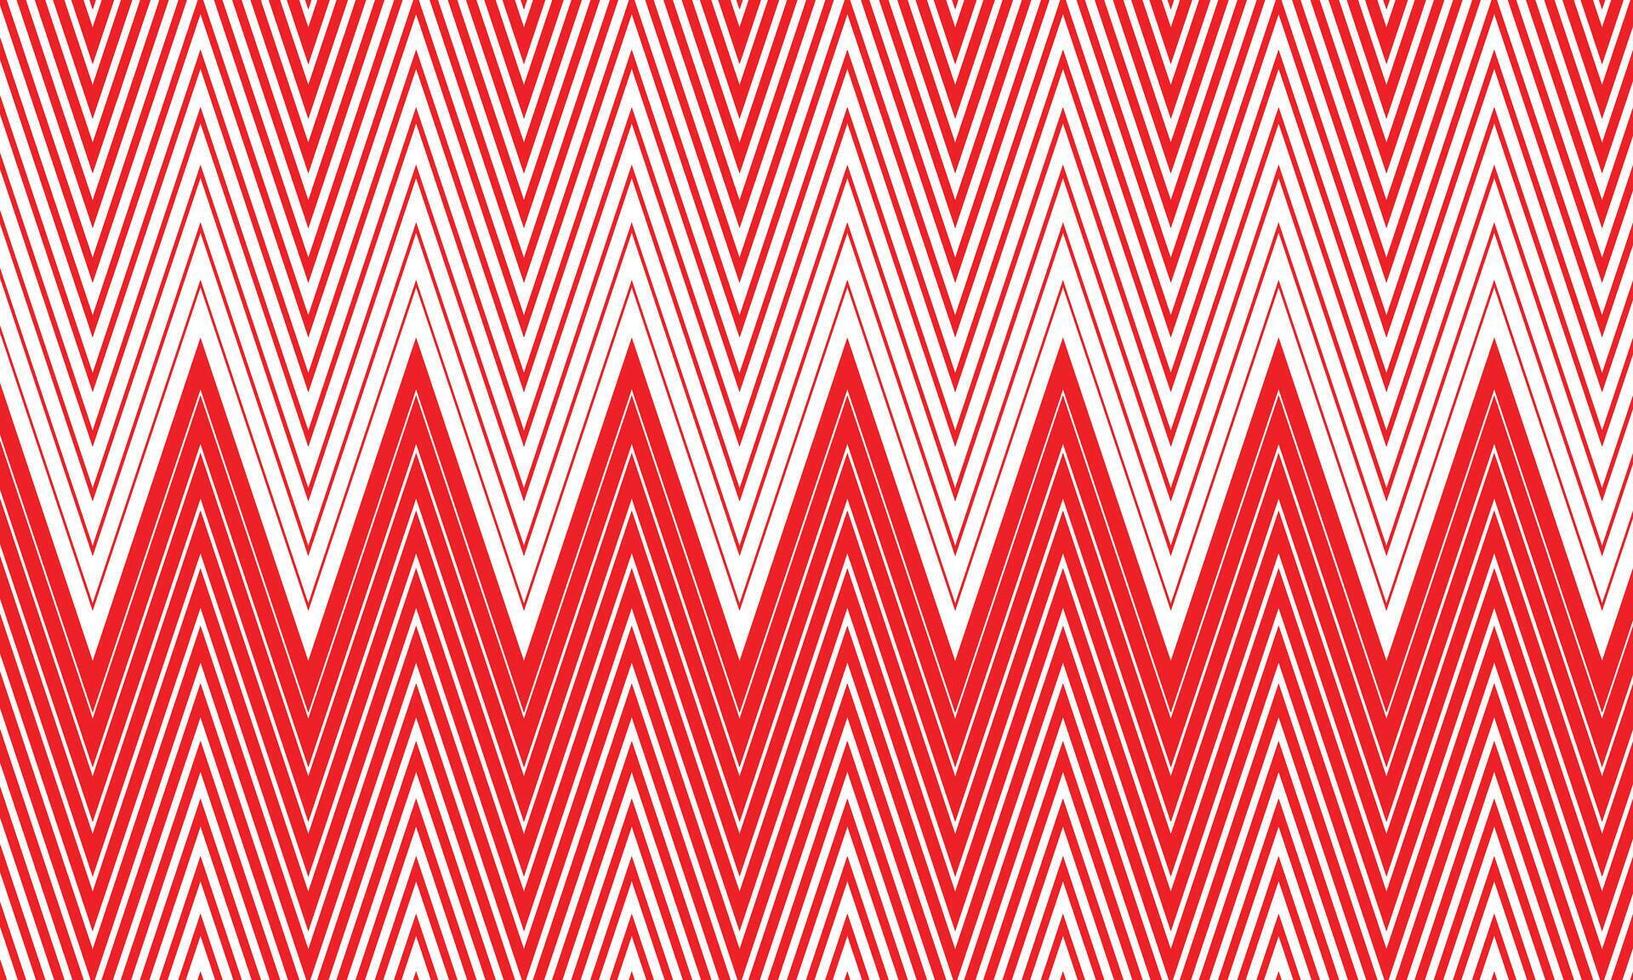 abstract geometric line pattern vector illustration